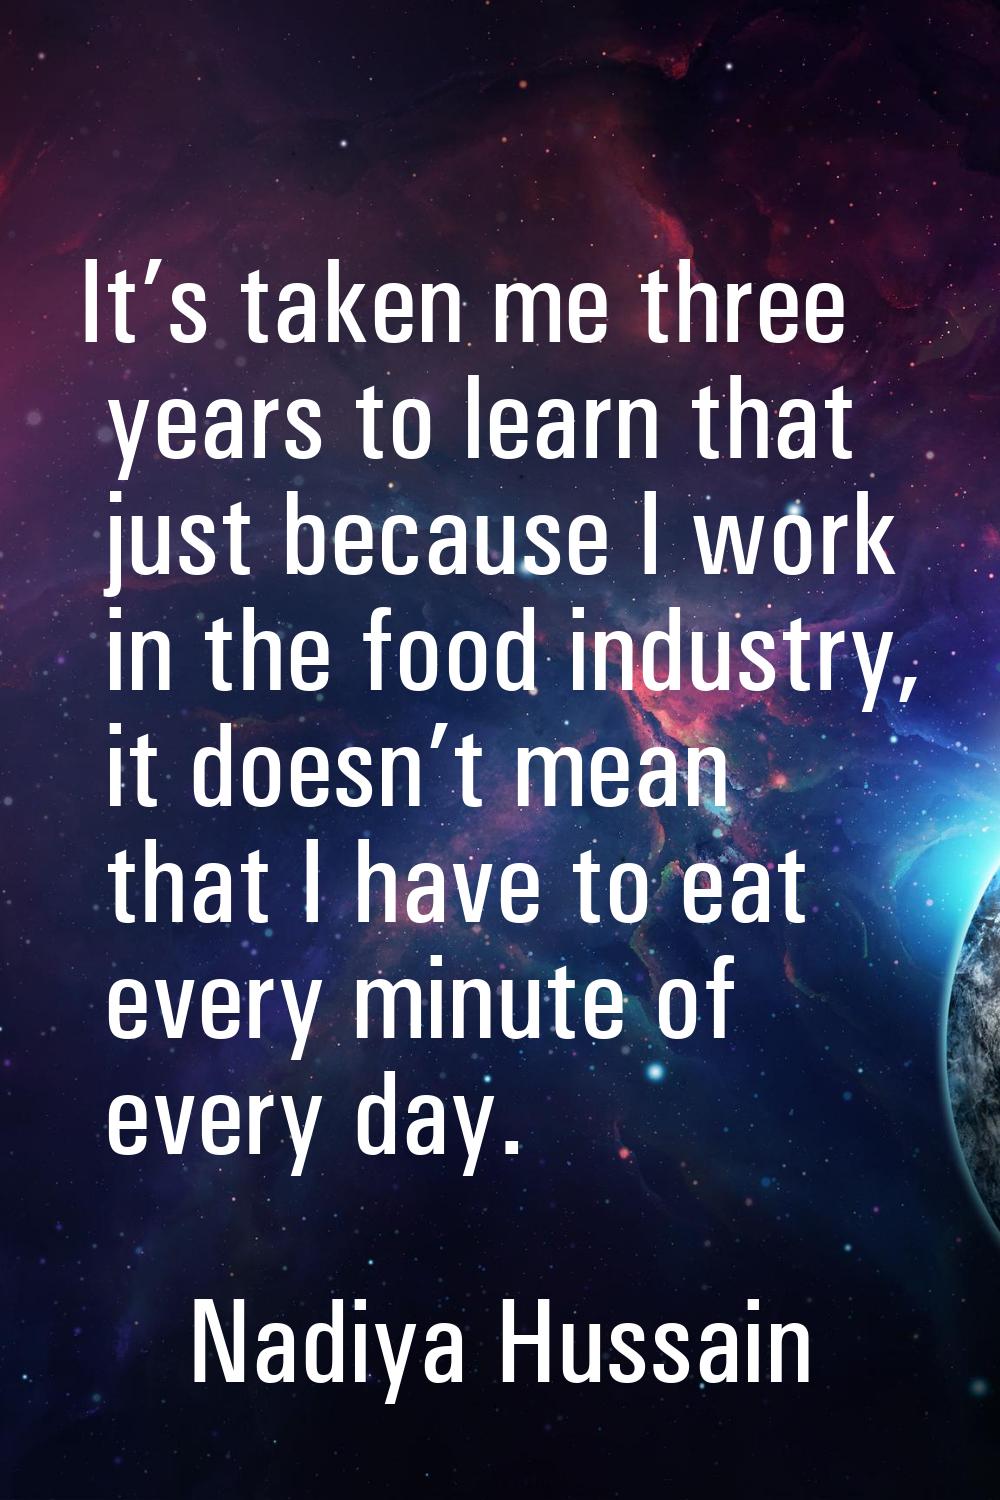 It’s taken me three years to learn that just because I work in the food industry, it doesn’t mean t